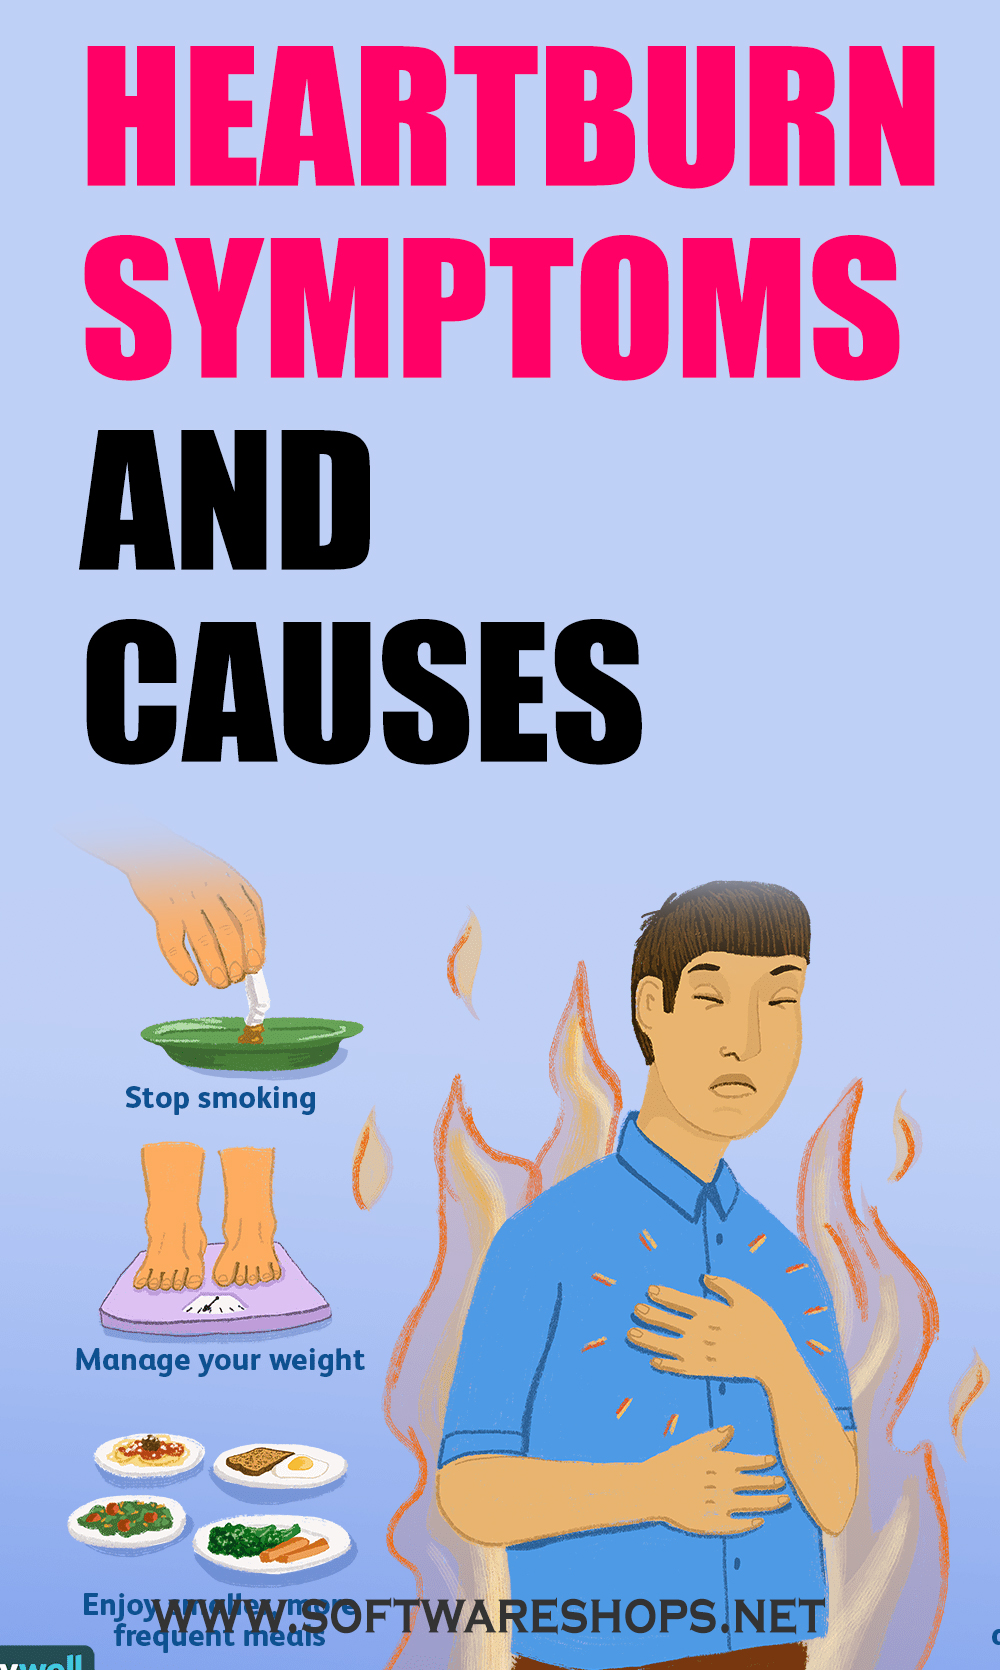 Heartburn - Symptoms and causes